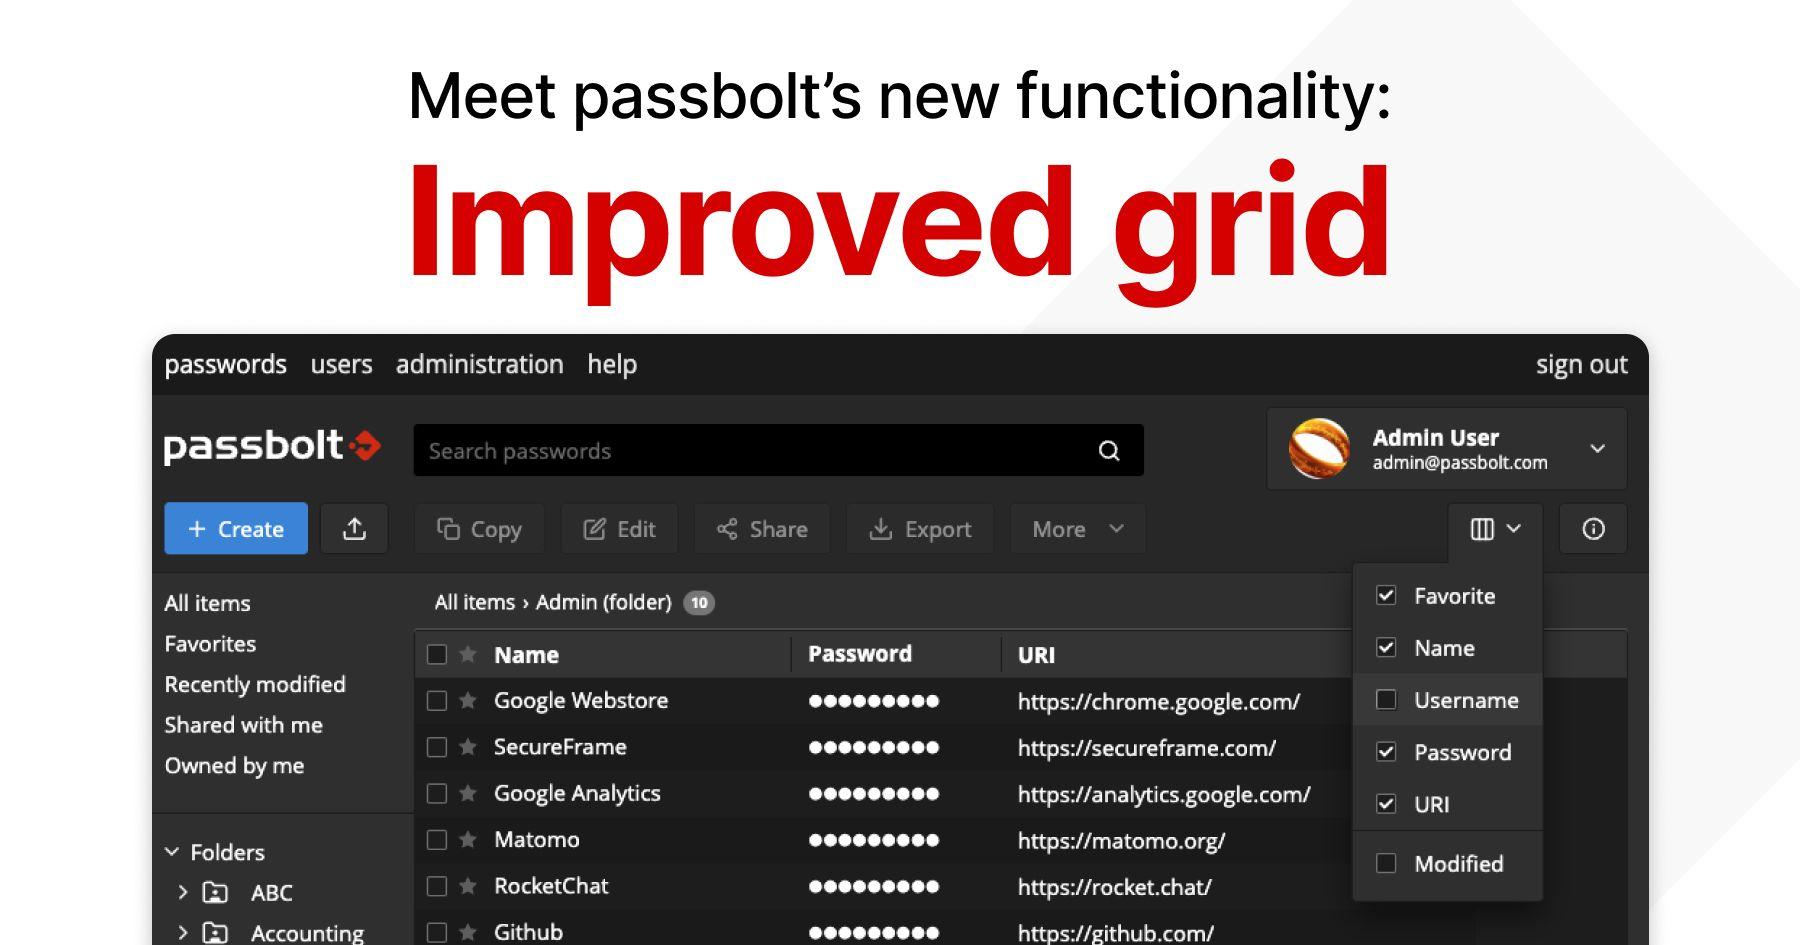 Meet Passbolt’s Improved Grid Functionality